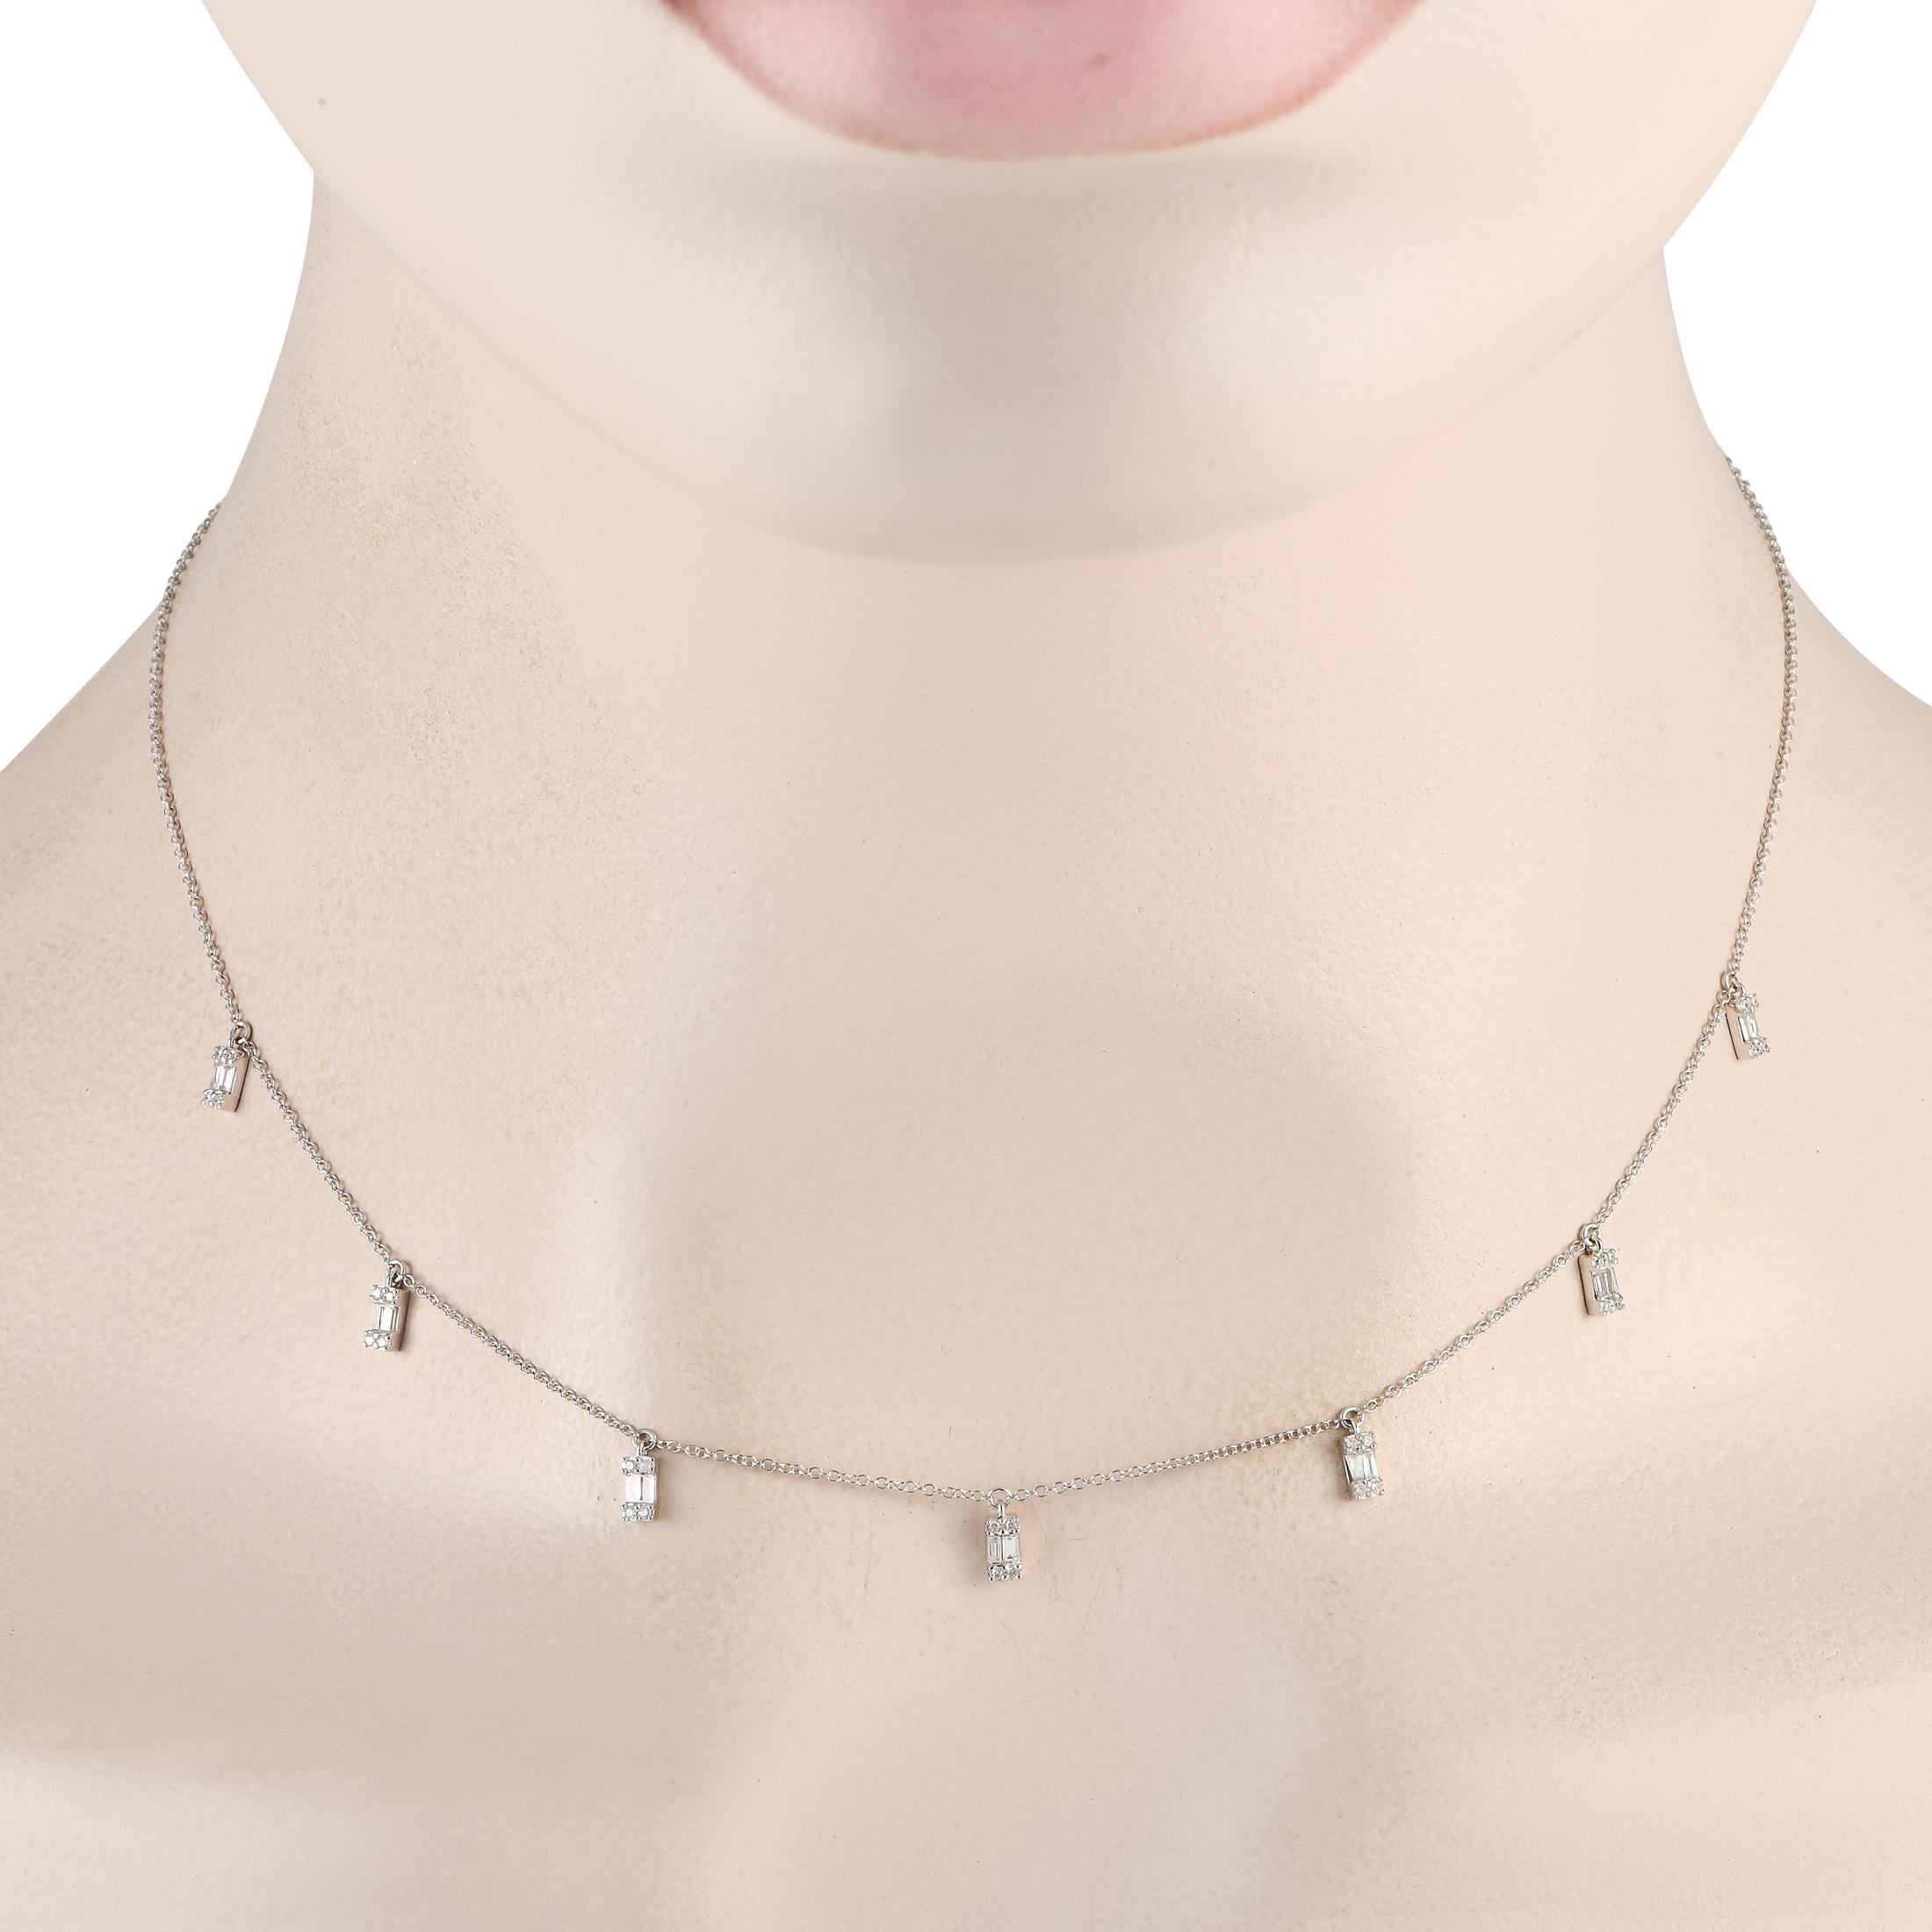 Here is an necklace perfect for adding a touching of modern elegance to your looks. The 14K white gold necklace chain measures 16 long and has a lobster clasp. Hanging from the central portion are seven diamond stations, with each station bearing